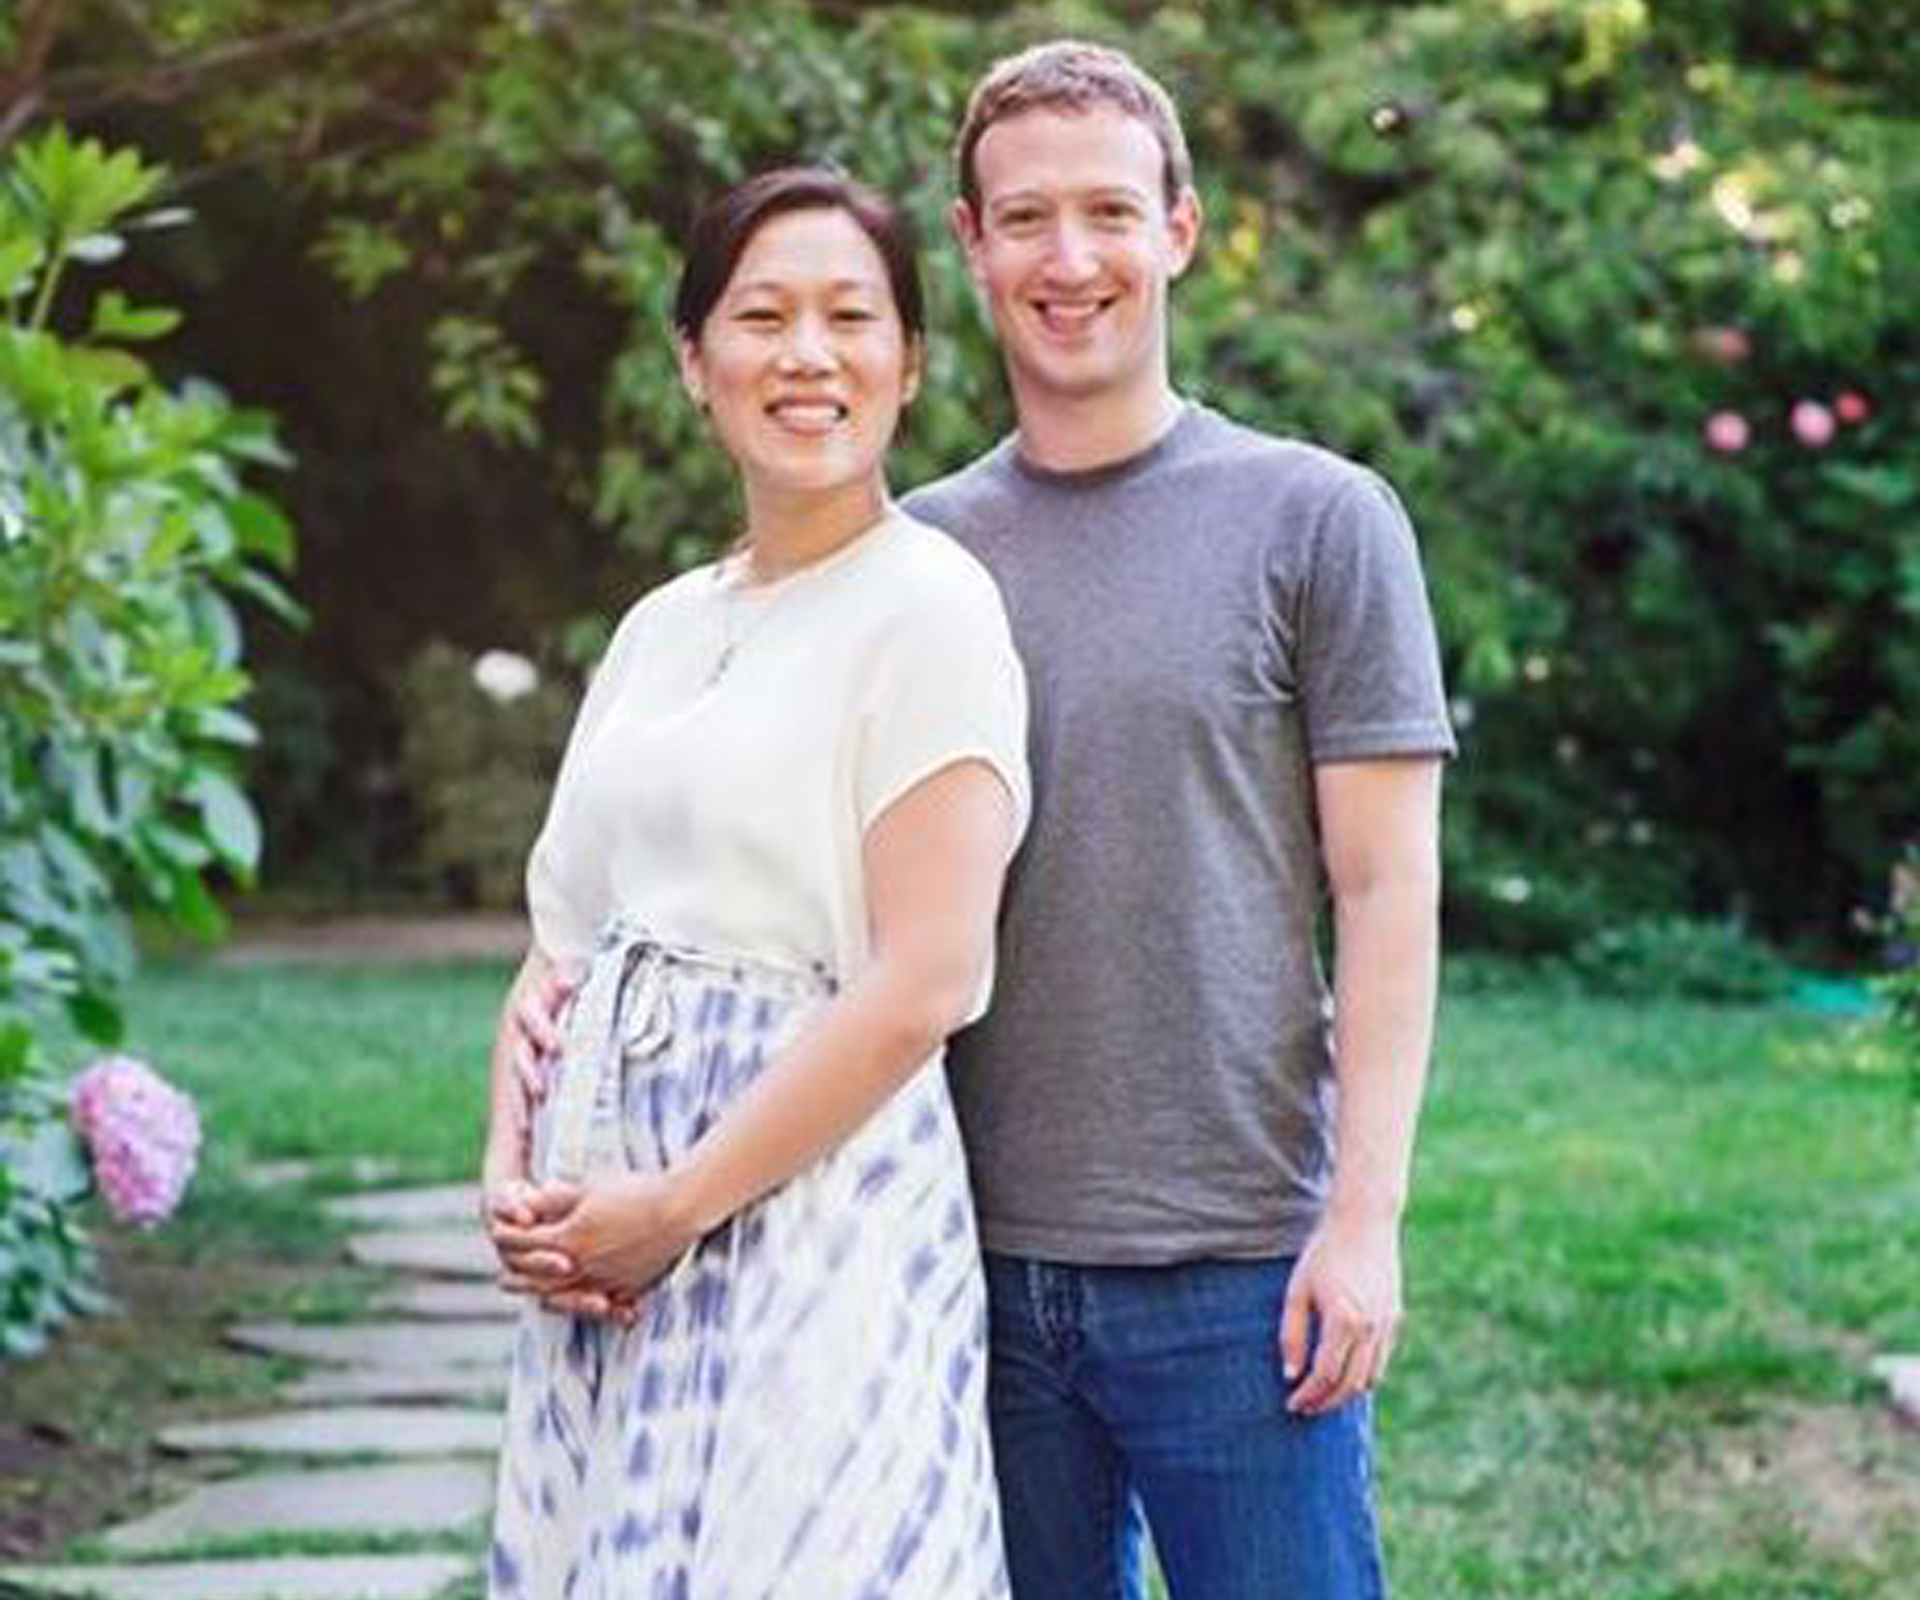 Facebook’s Mark Zuckerberg to take two months’ paternity leave